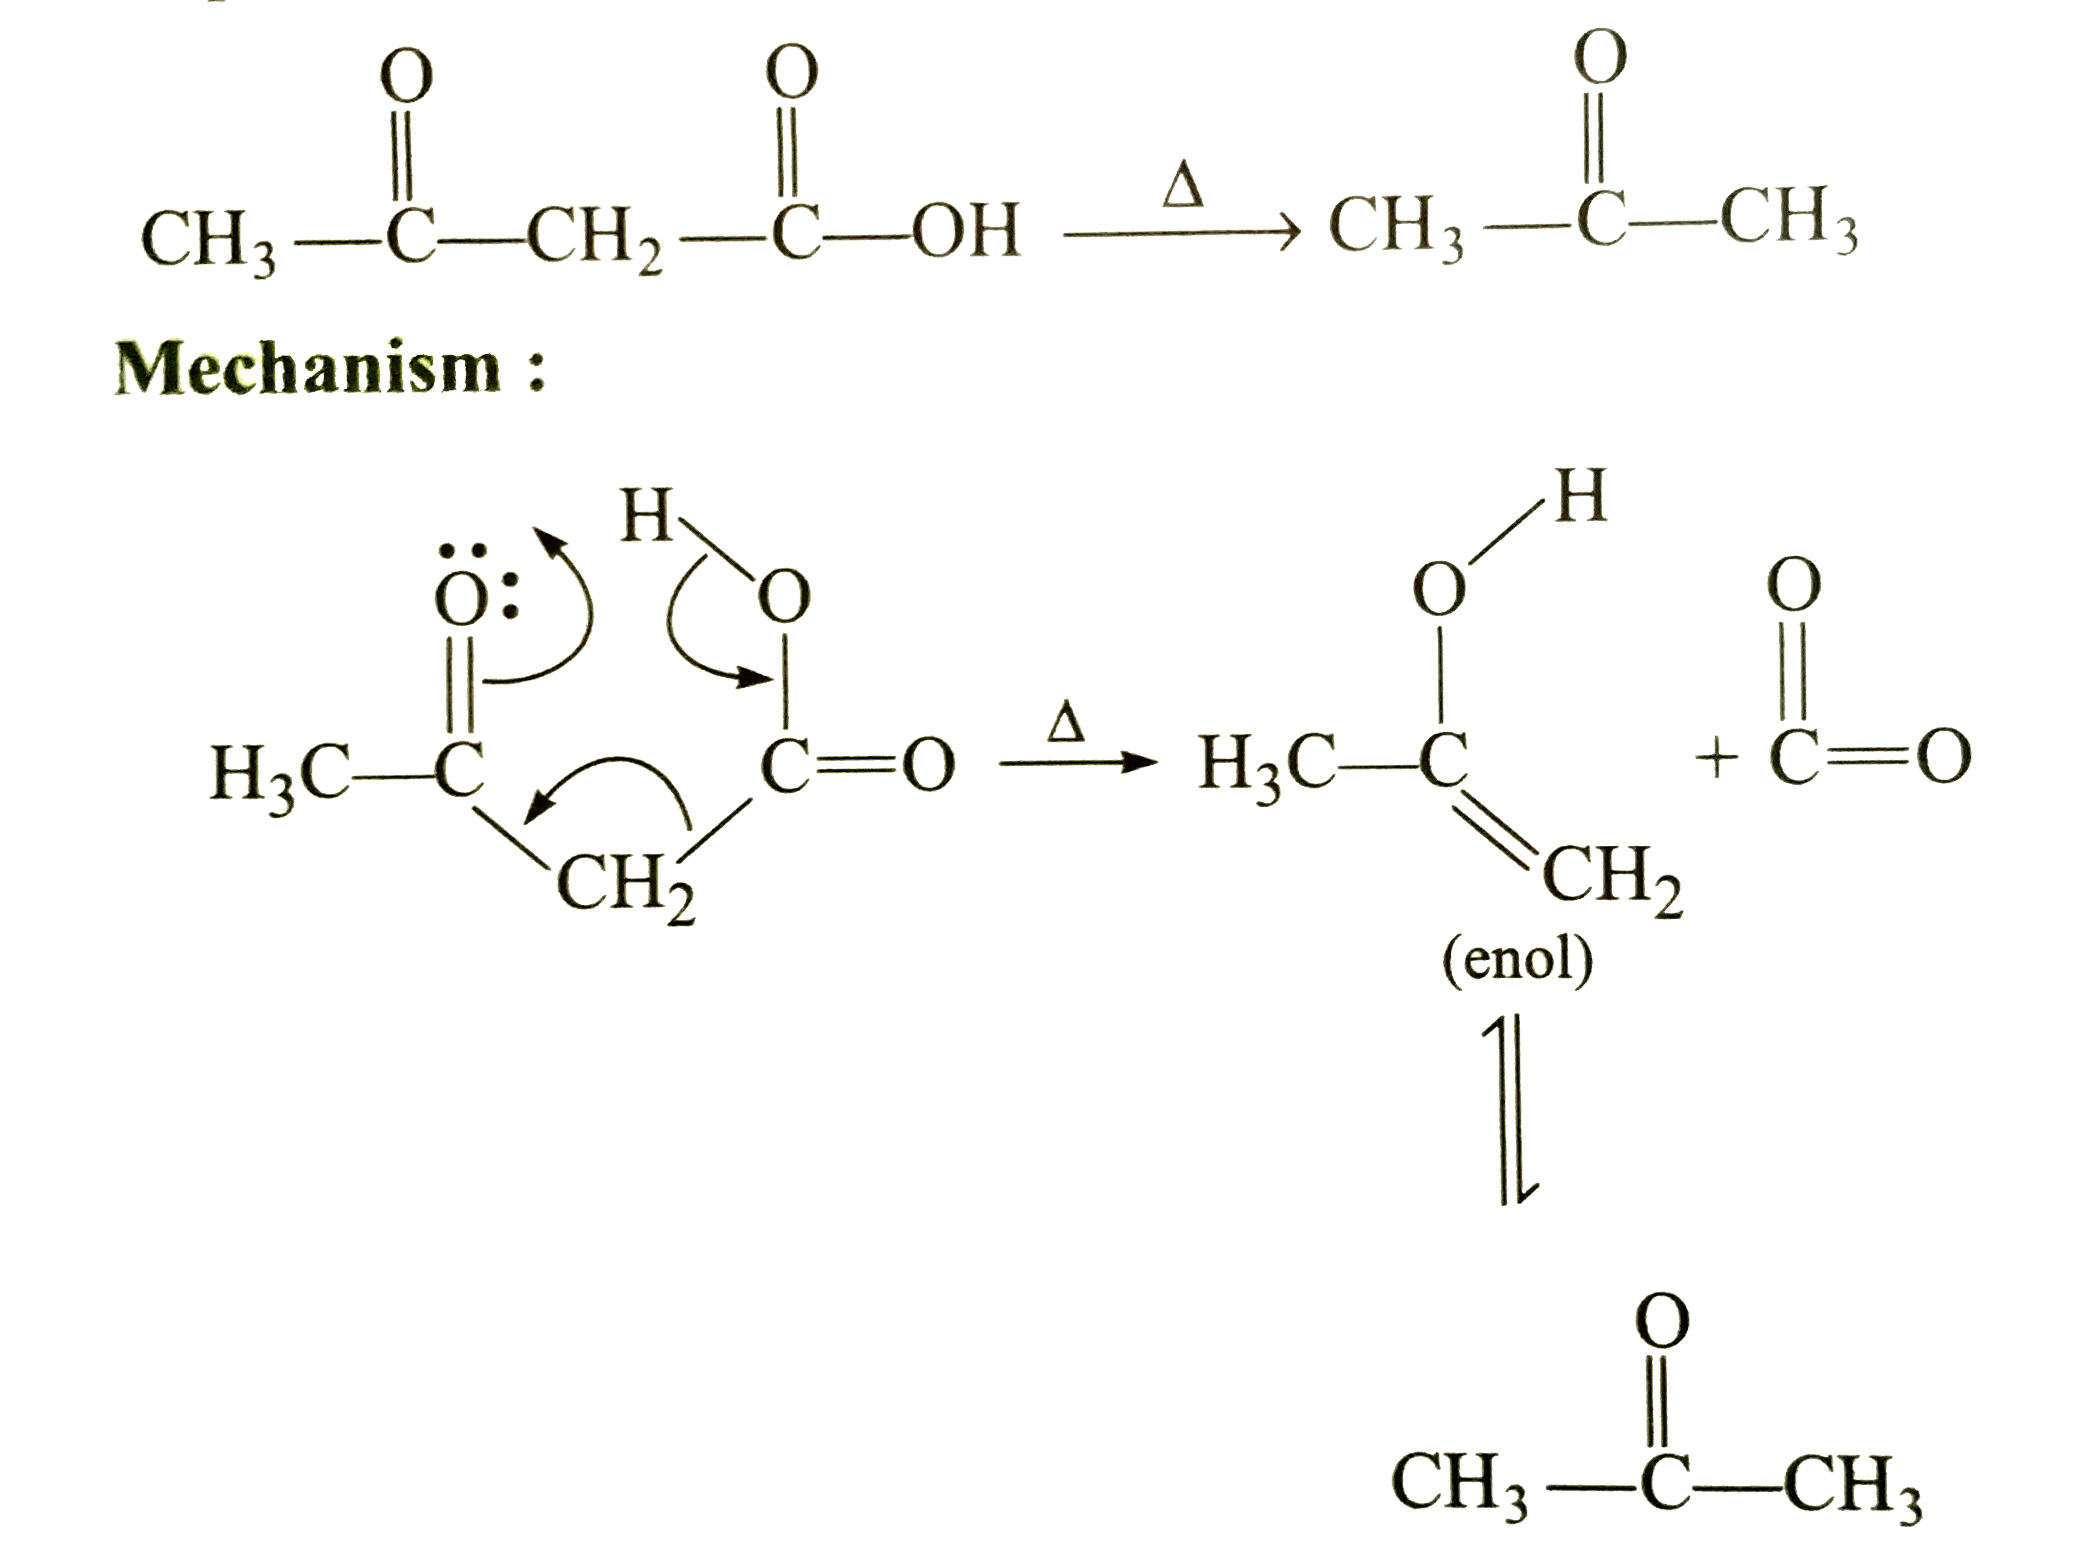 The decarboxylation of beta-ketoacids beta,gamma-unsaturated acid an germinal diacid proceed through the fomultlon of cyclic transition state in presence of heat.      Find the product of the following reaction :